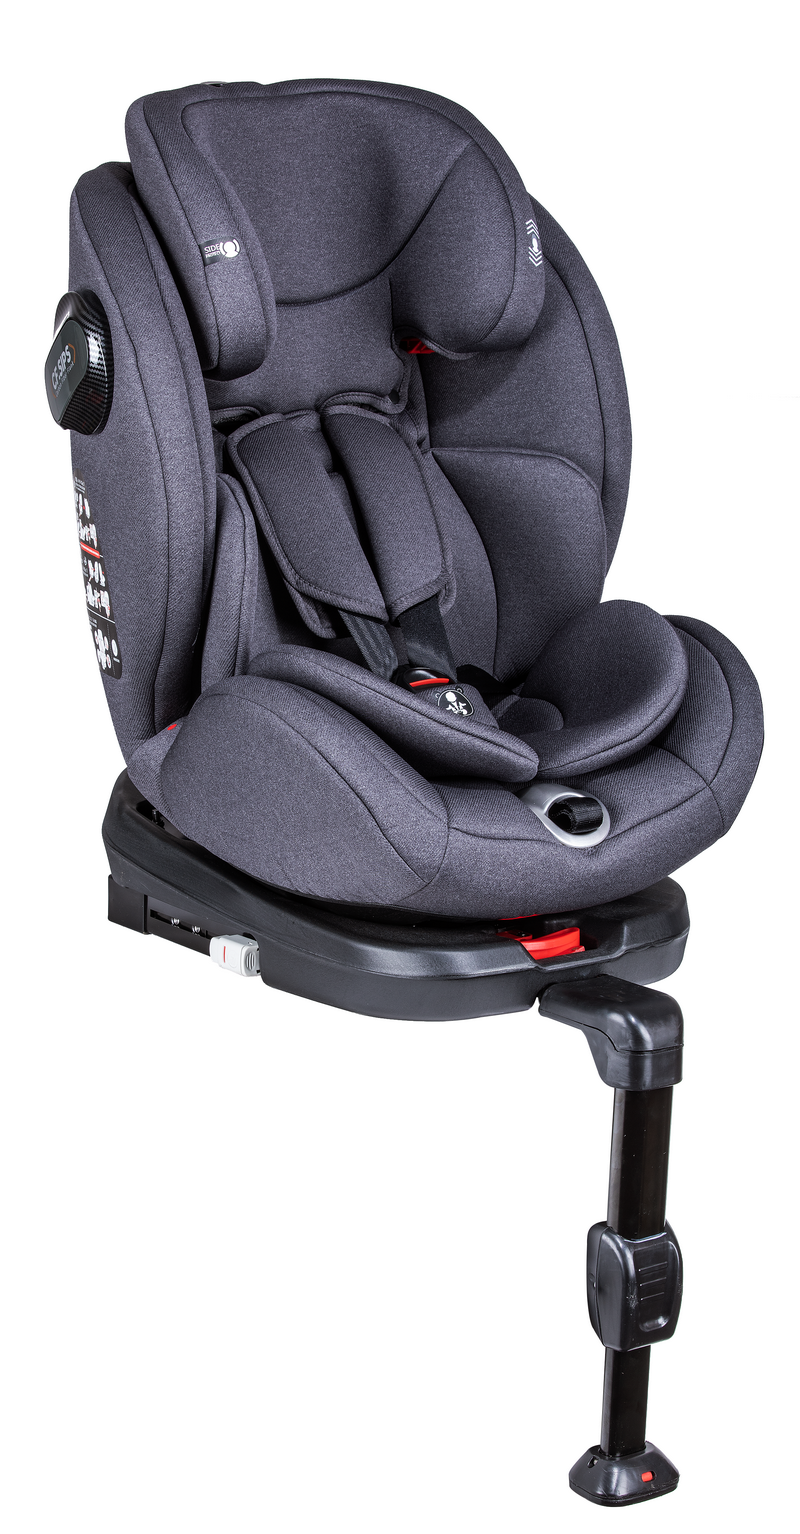 Steel-Framed Structure Big 12 Year Old Baby Car Seat